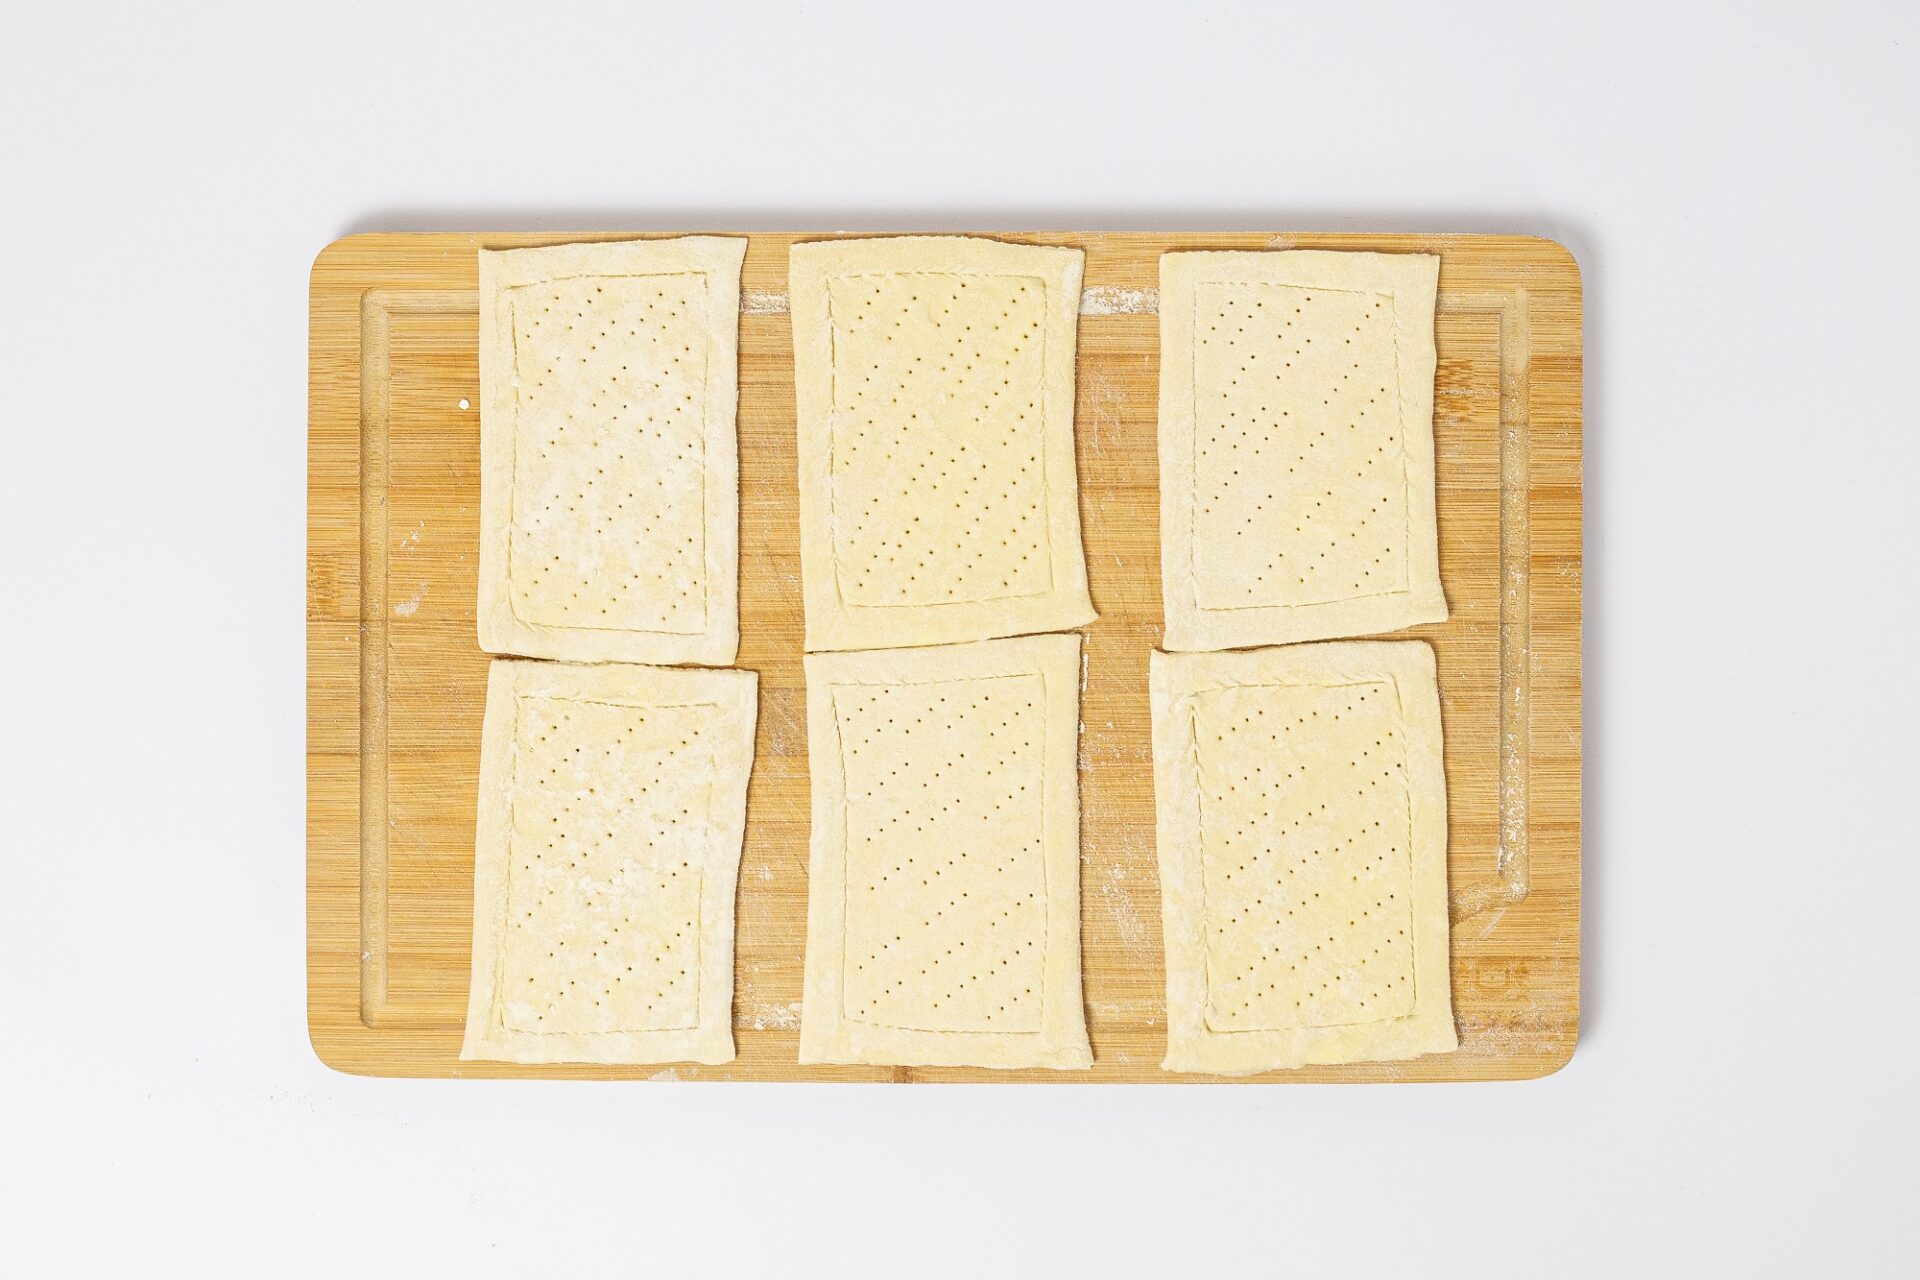 Scored puff pastry on a cutting board.